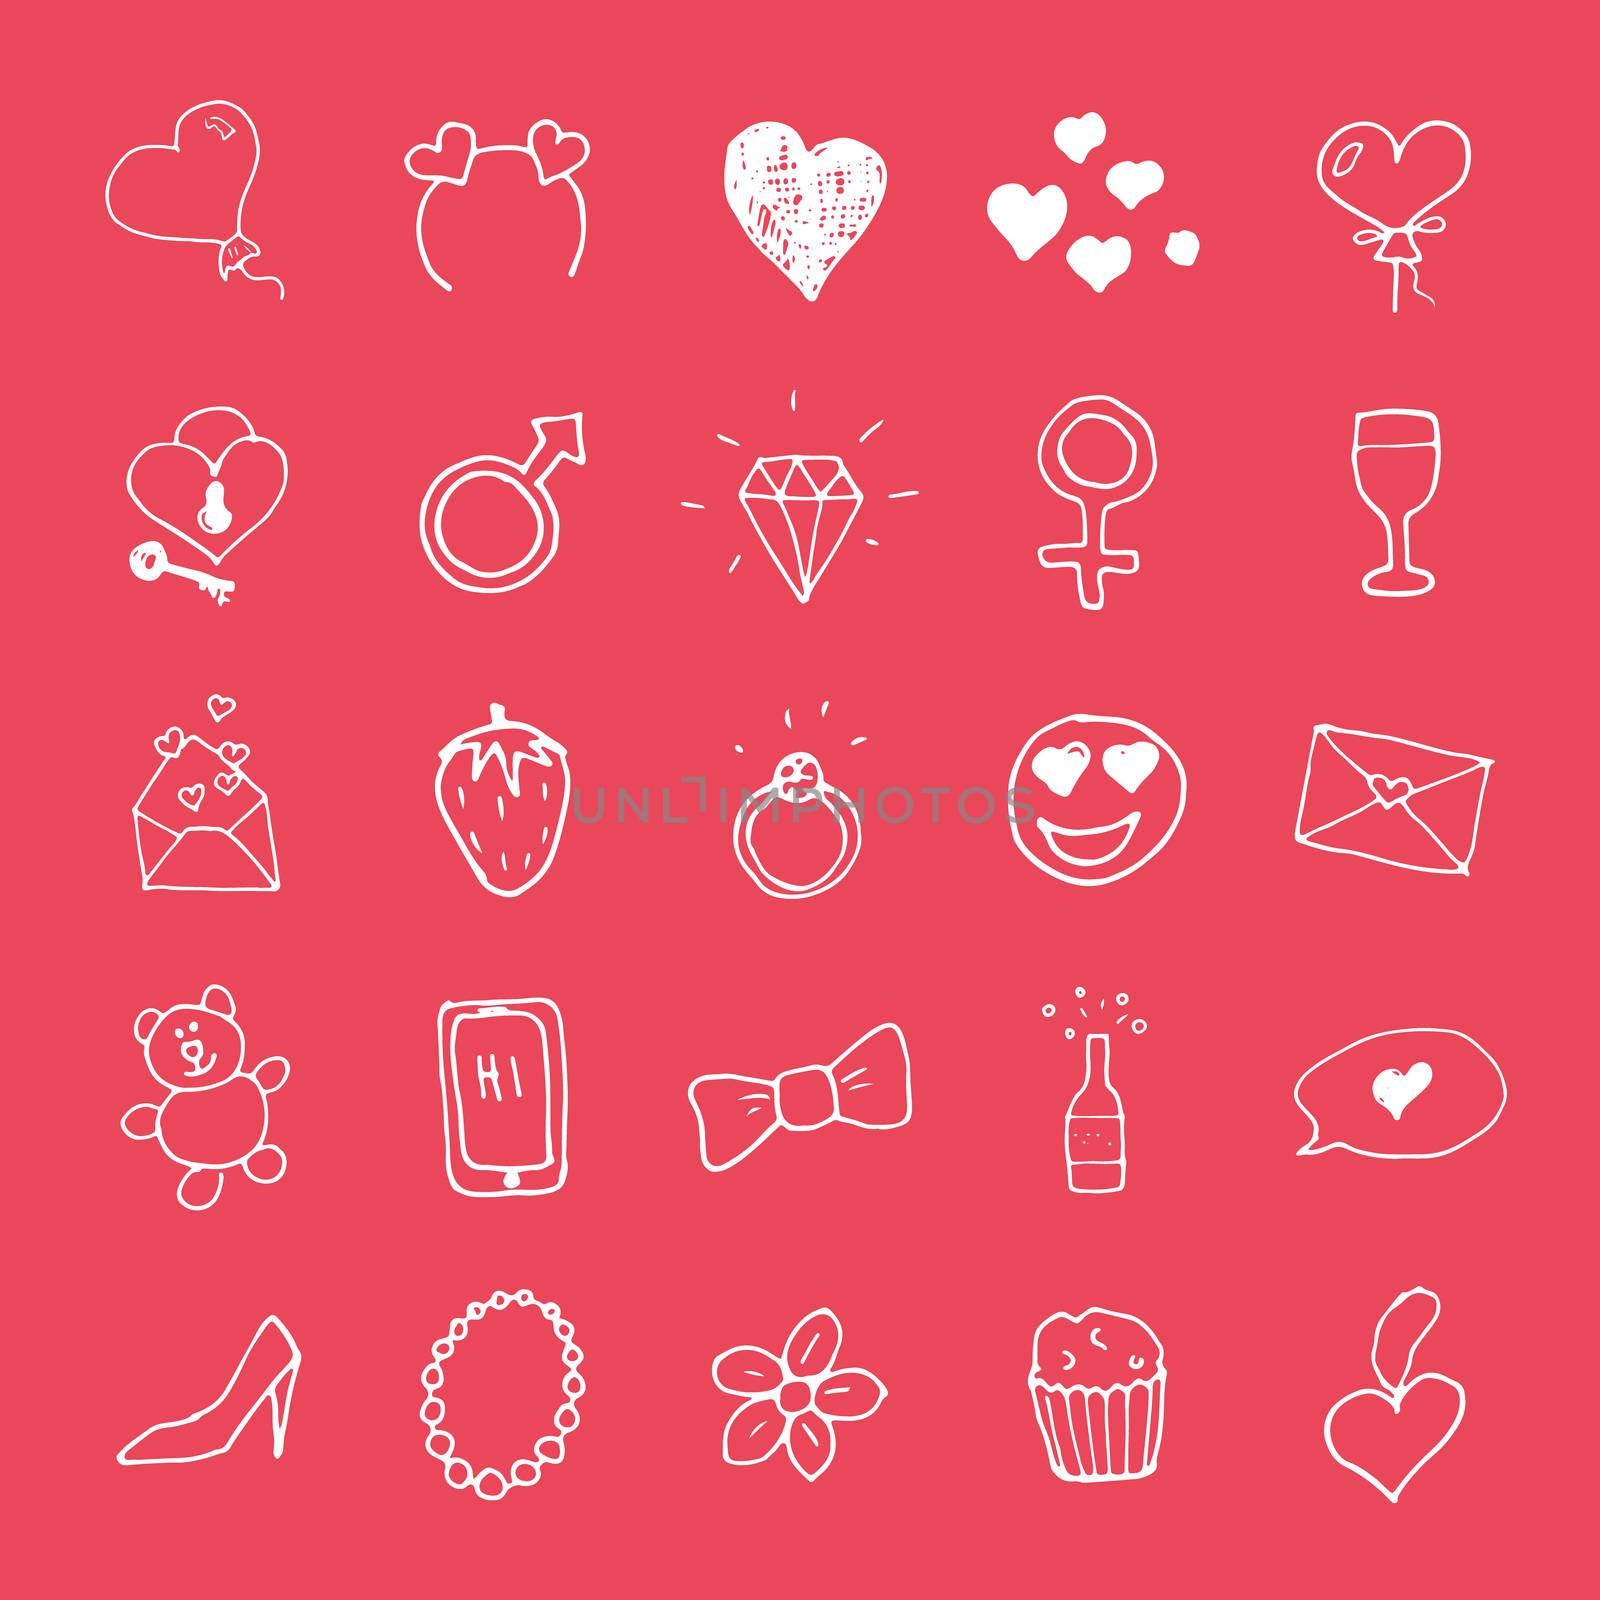 Love and valentine doodle Icons, hand drawn signs set, vector illustration.